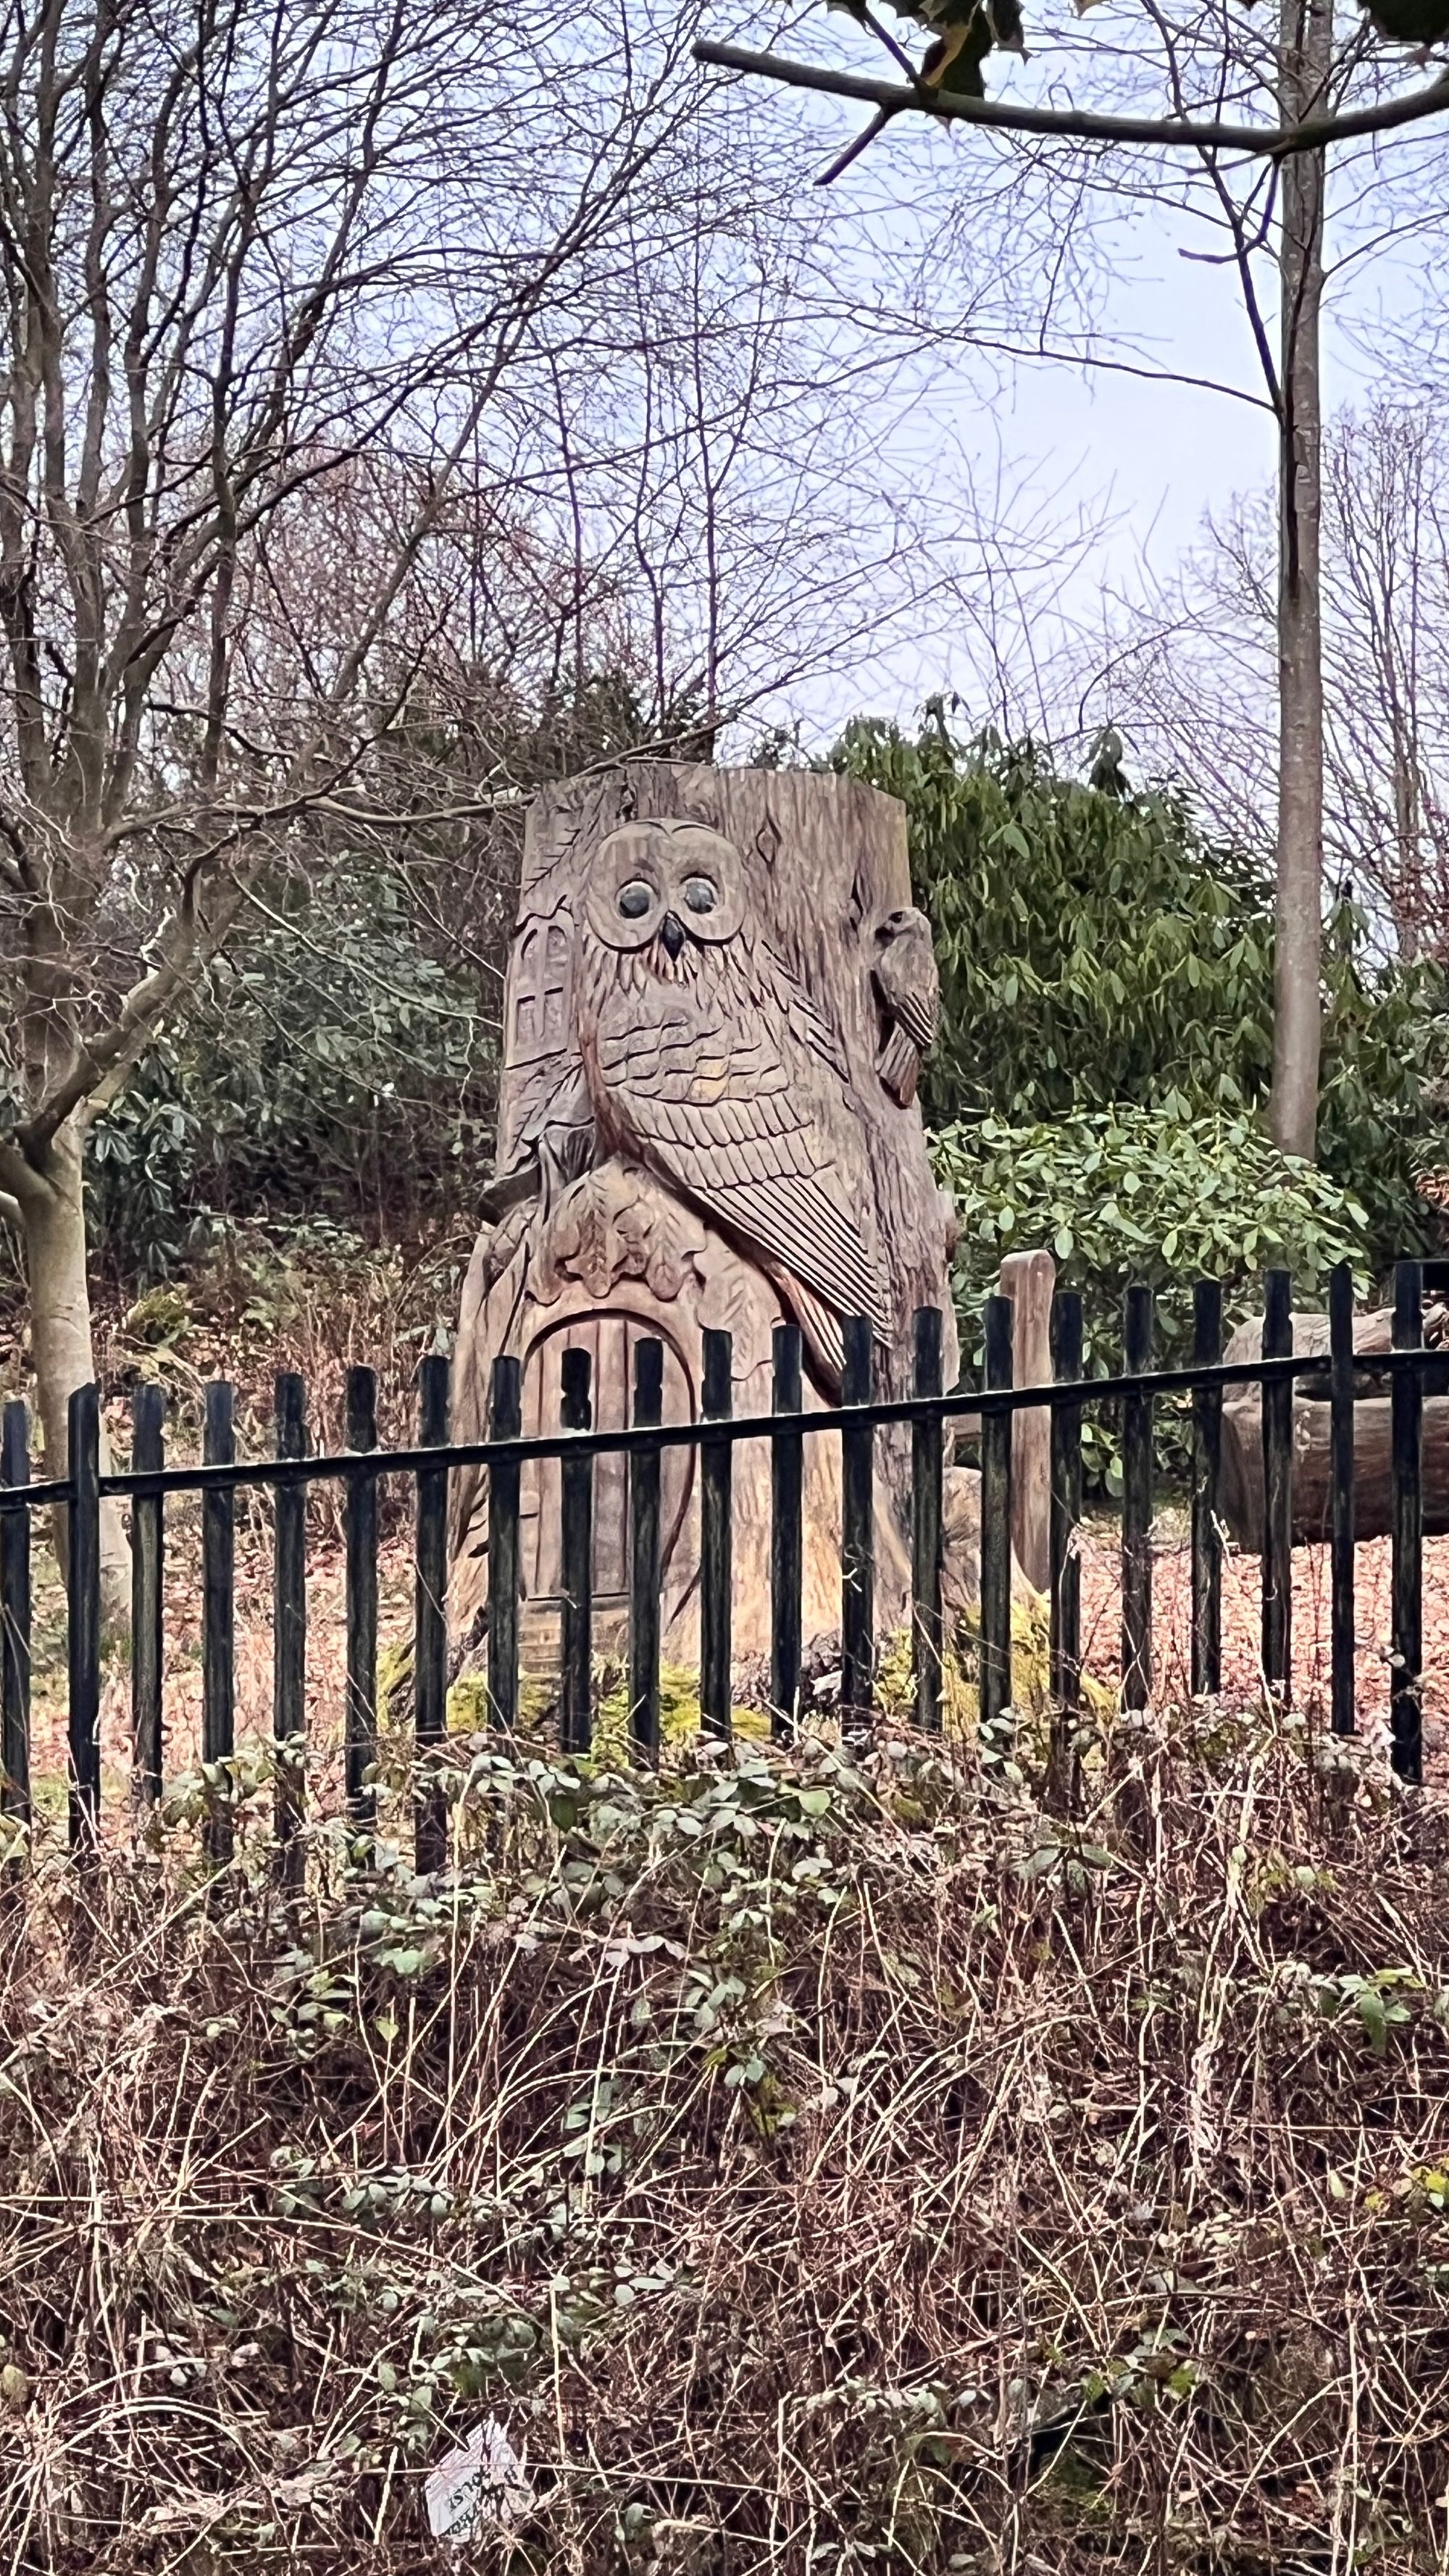 One of the many sculptures in Castlebank Park